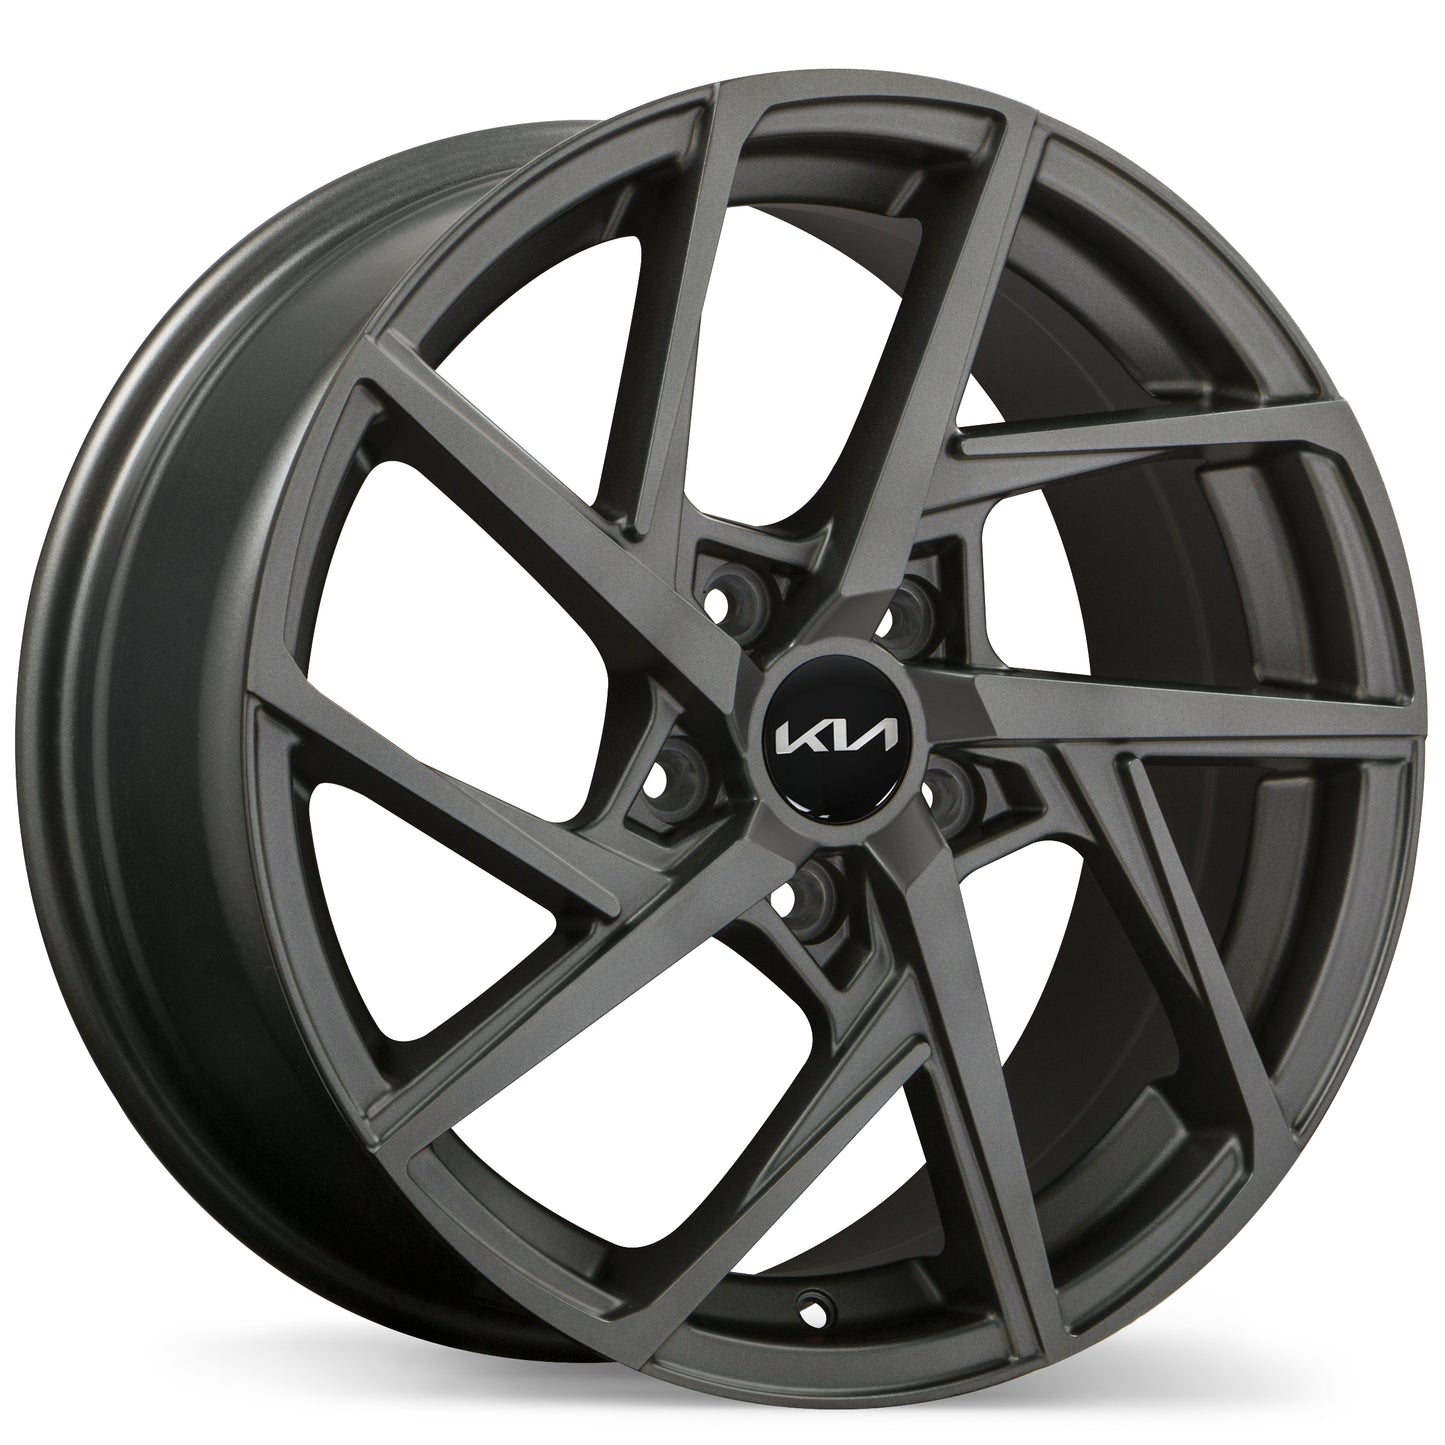 EV6 with 18 Alloy Wheels SIZE 235/60/18 Package with TPMS EV6PKG4